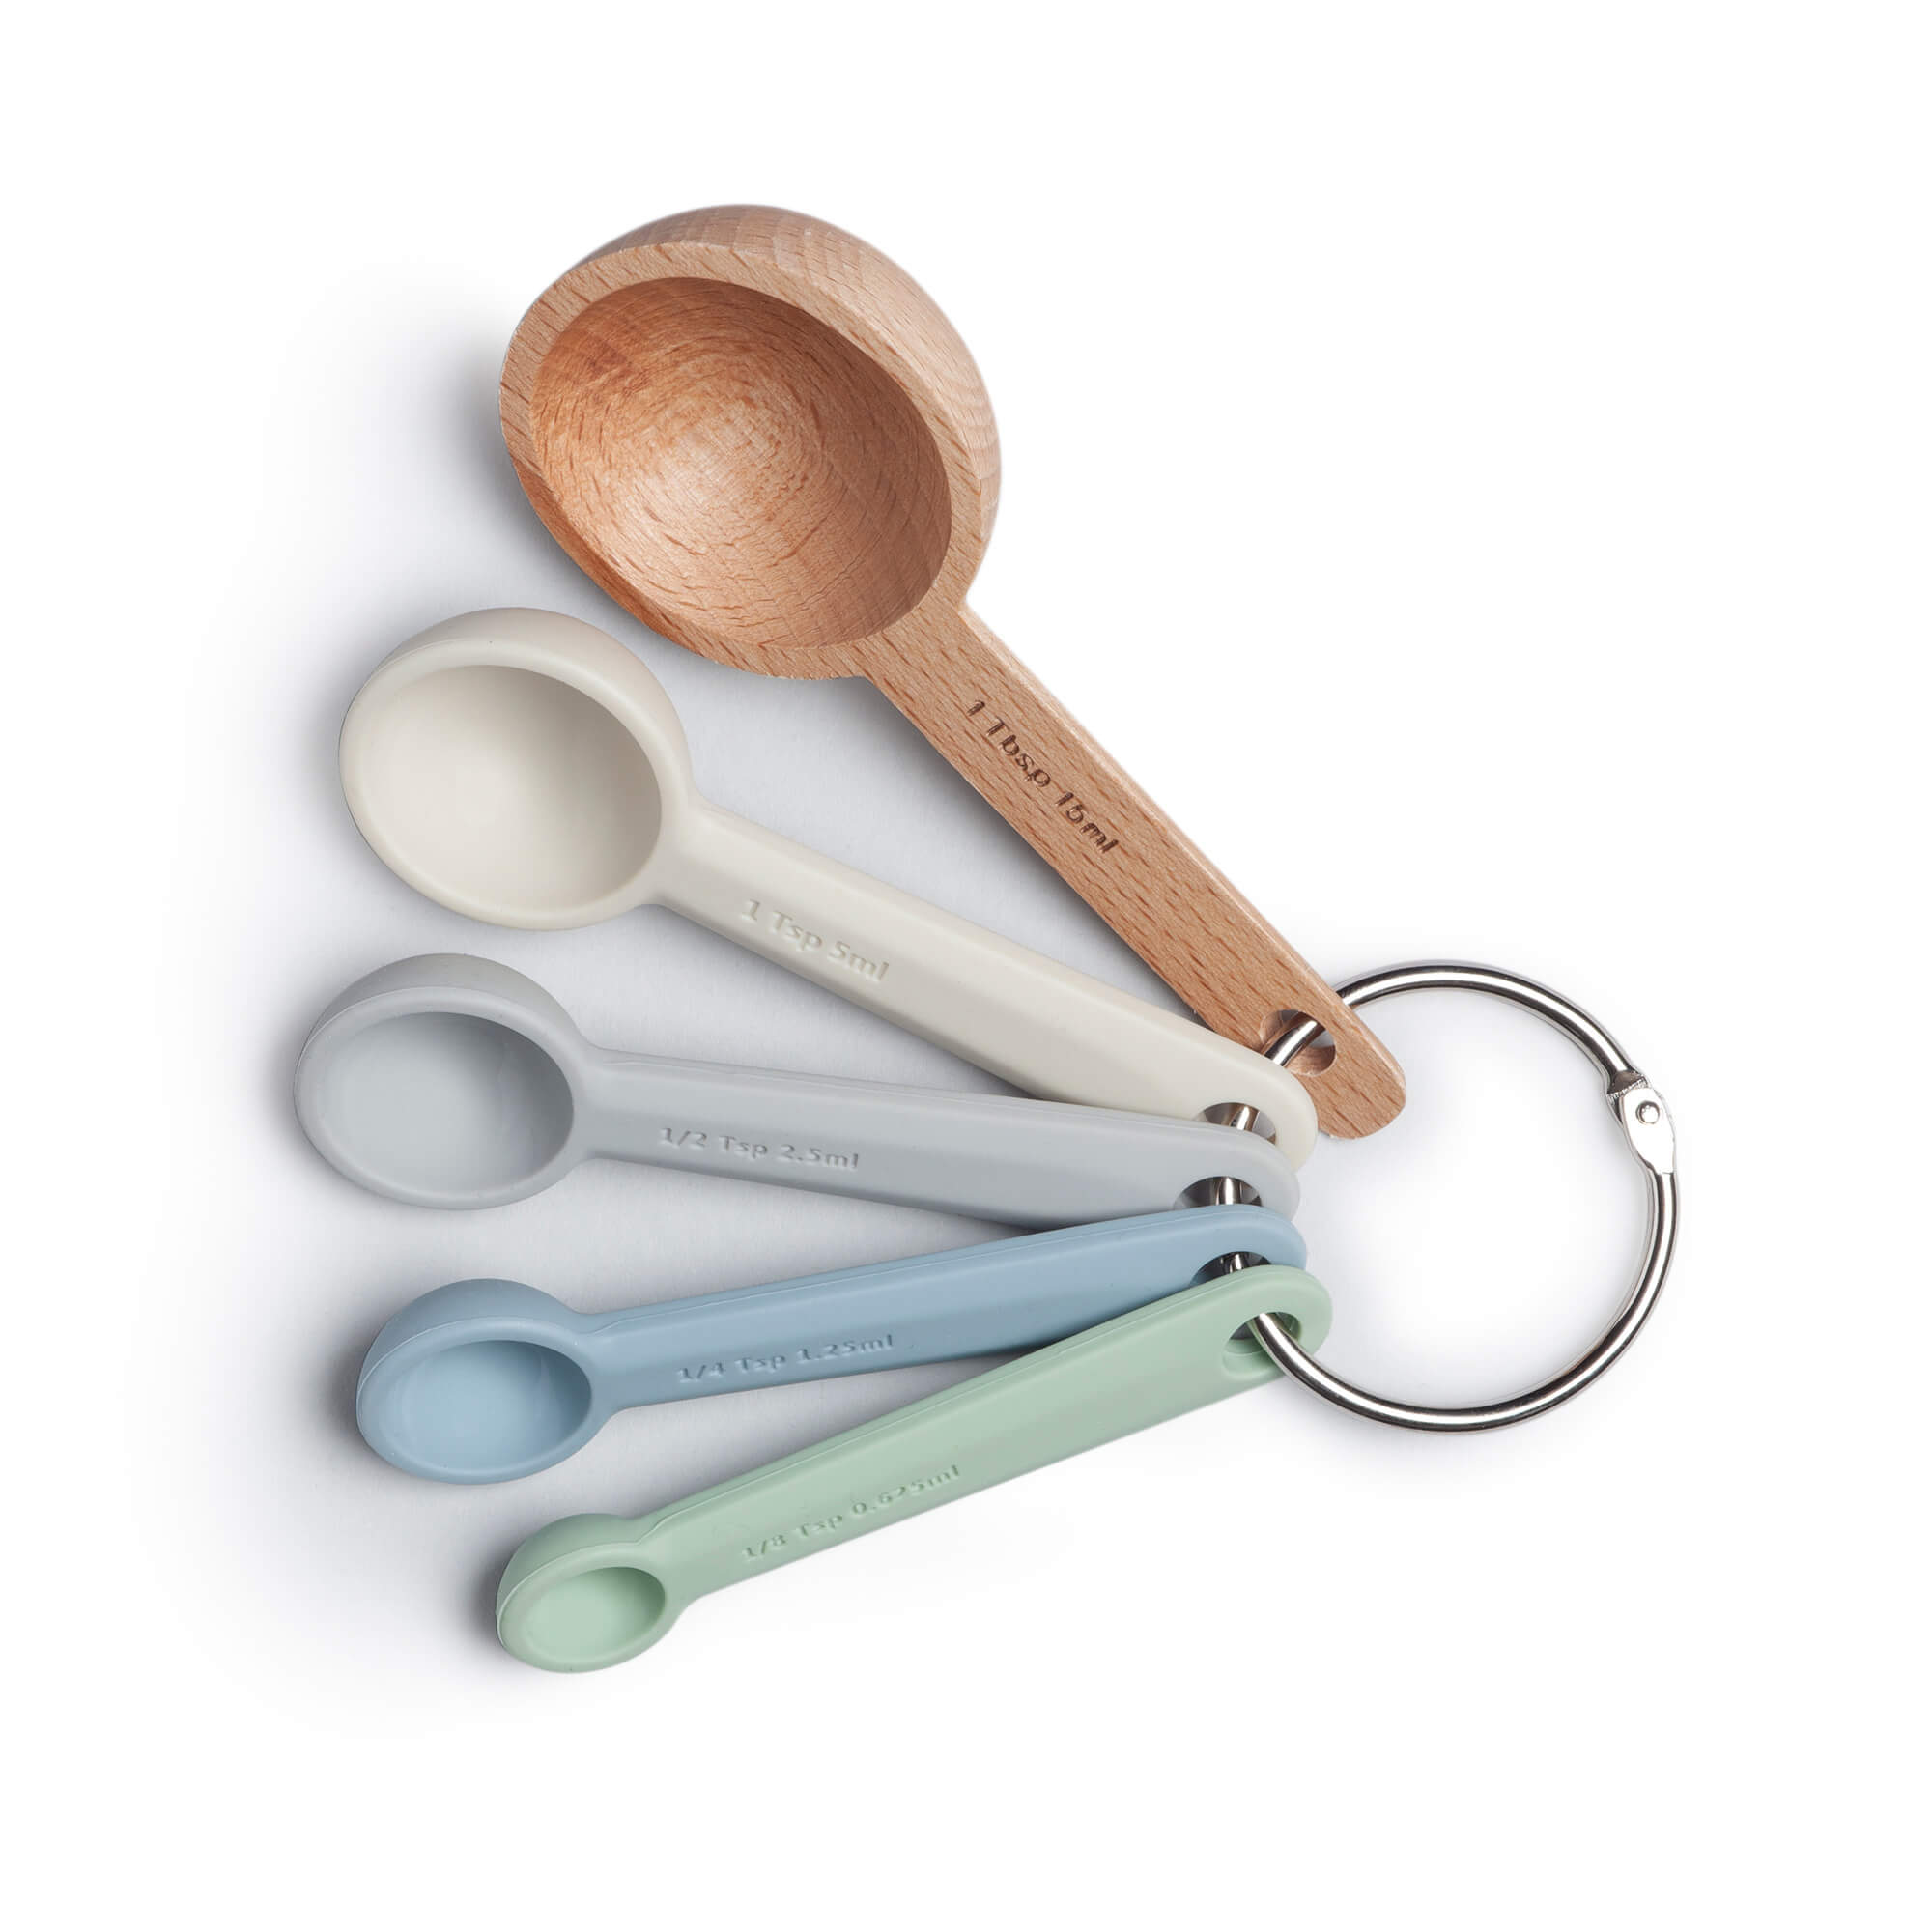 Mix & Measure Spoon - Silicone spoon with adjustable measuring